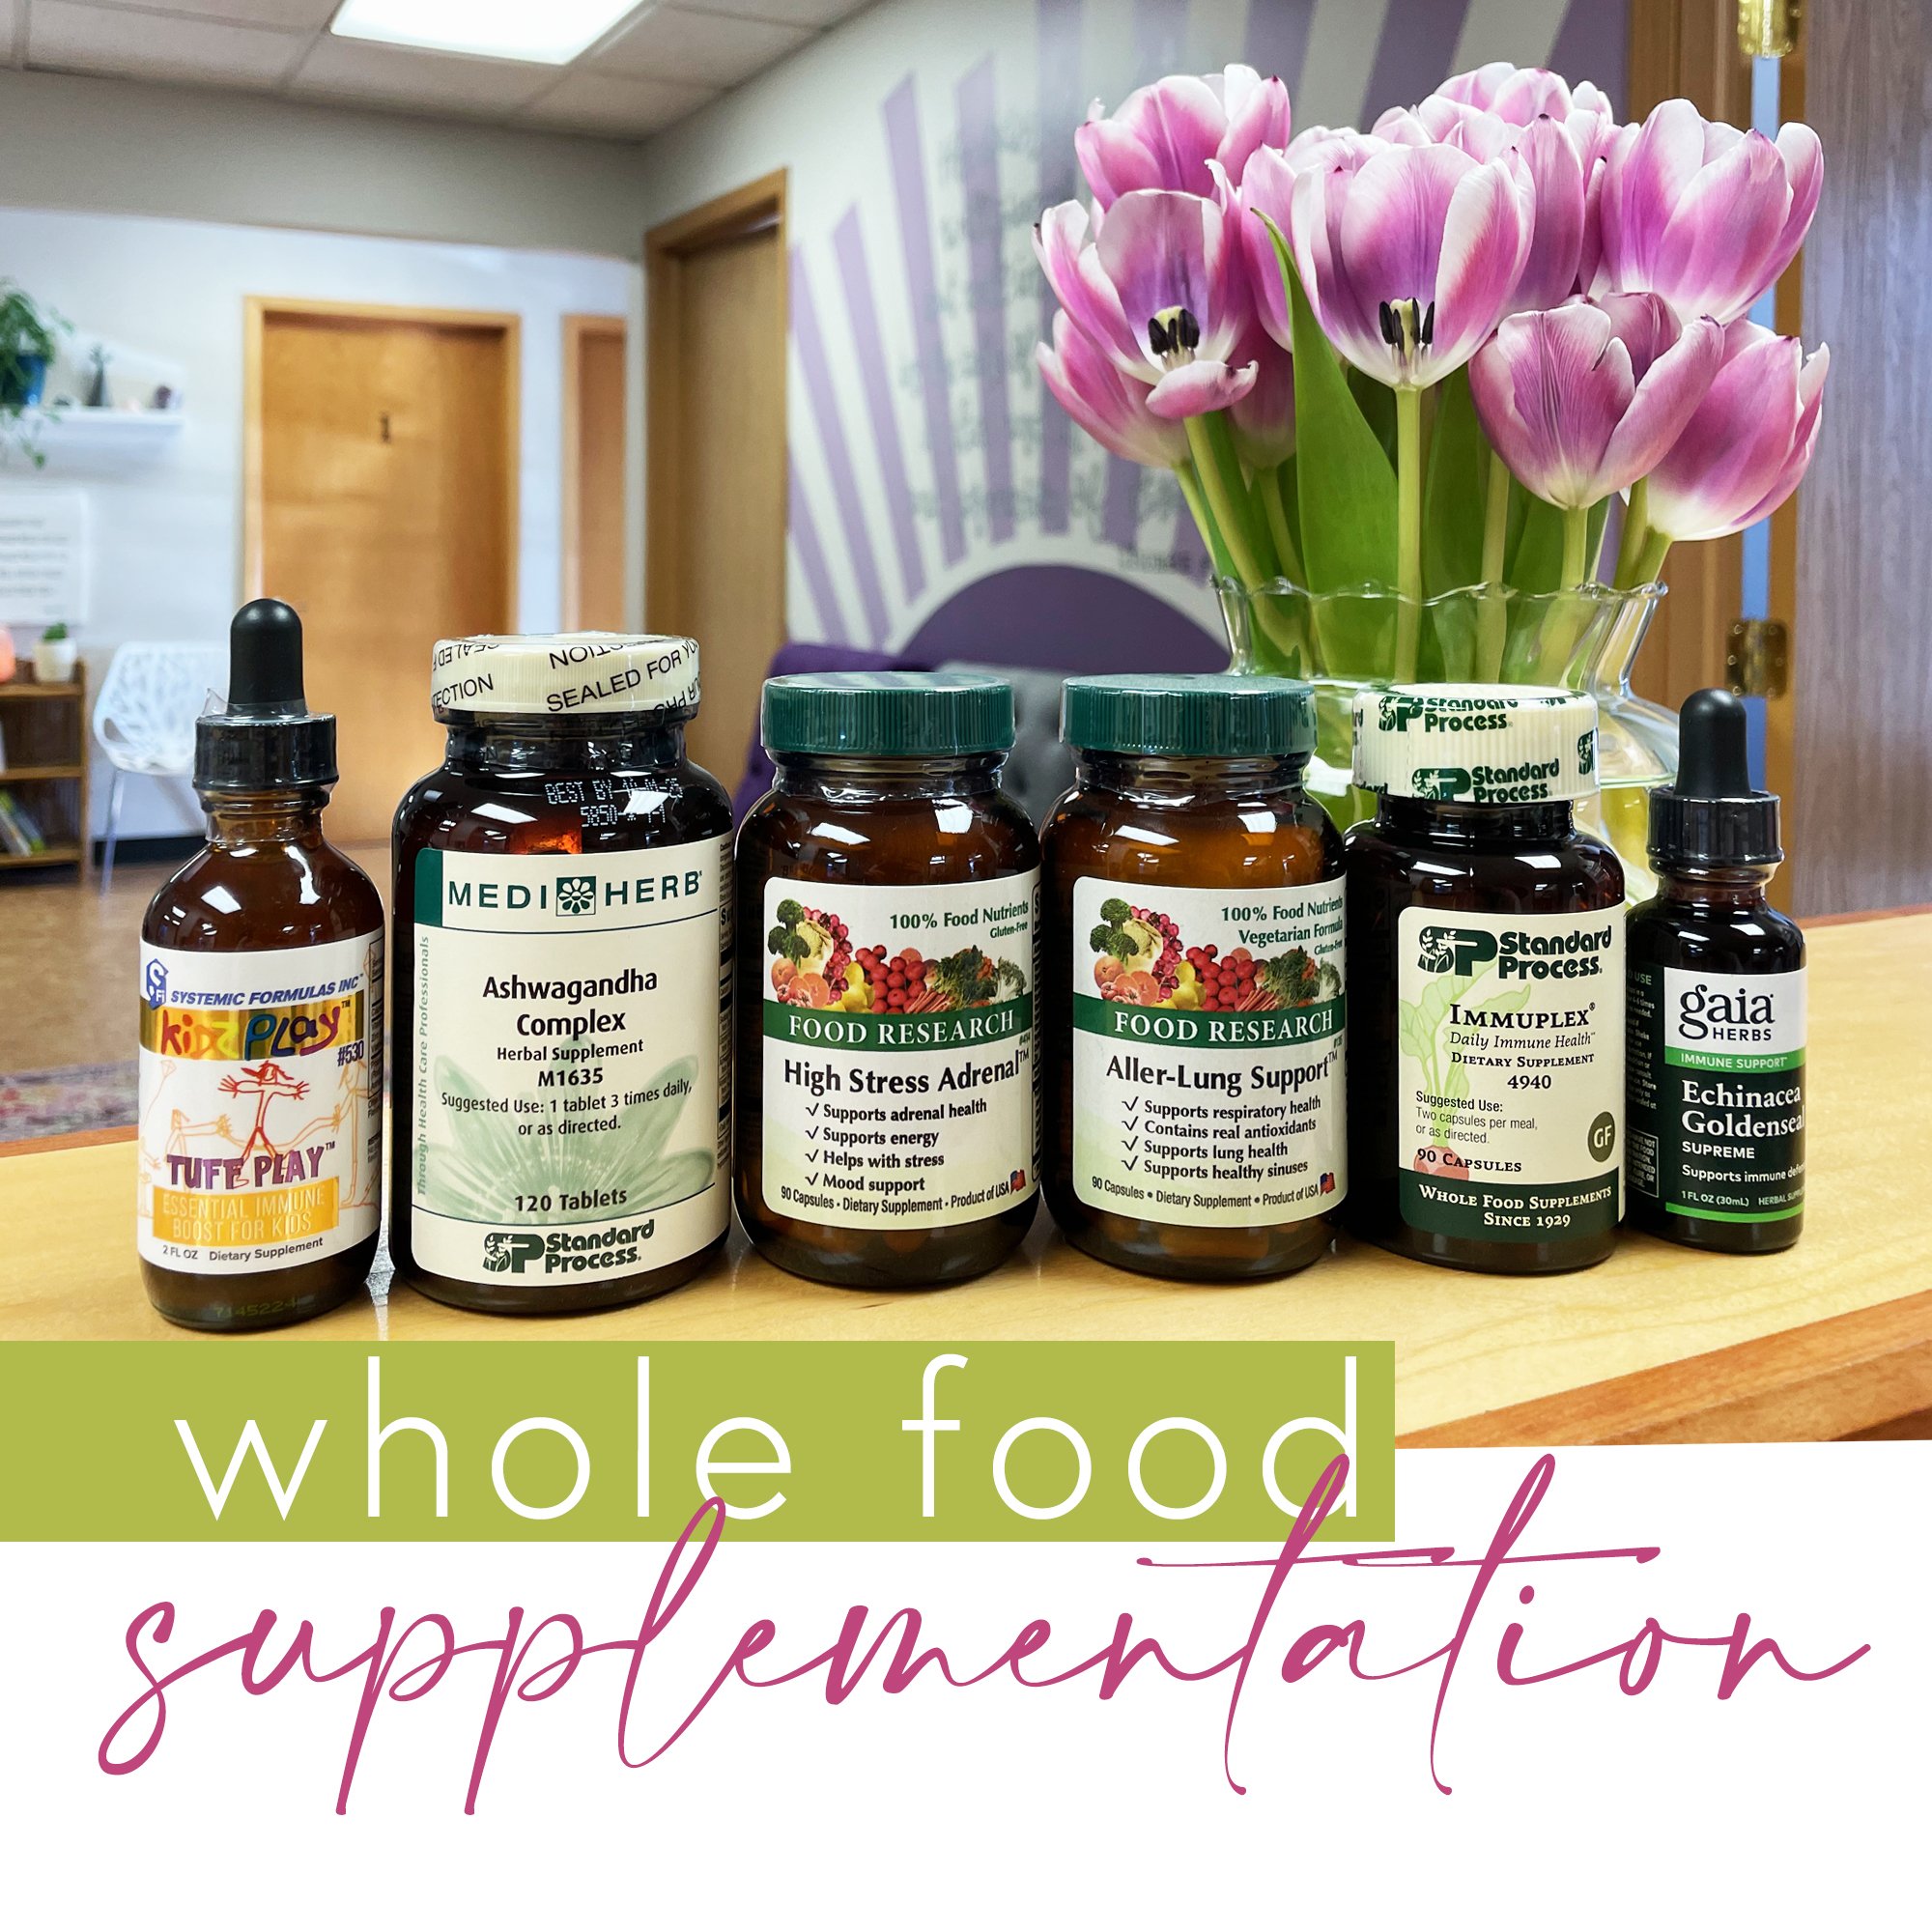 Does it really matter if you get cheap synthetic supplements from the store or purchase quality whole food ones? We think so! So many people have taken supplements and say they don't work. But was it synthetic or whole food? Synthetic supplements are